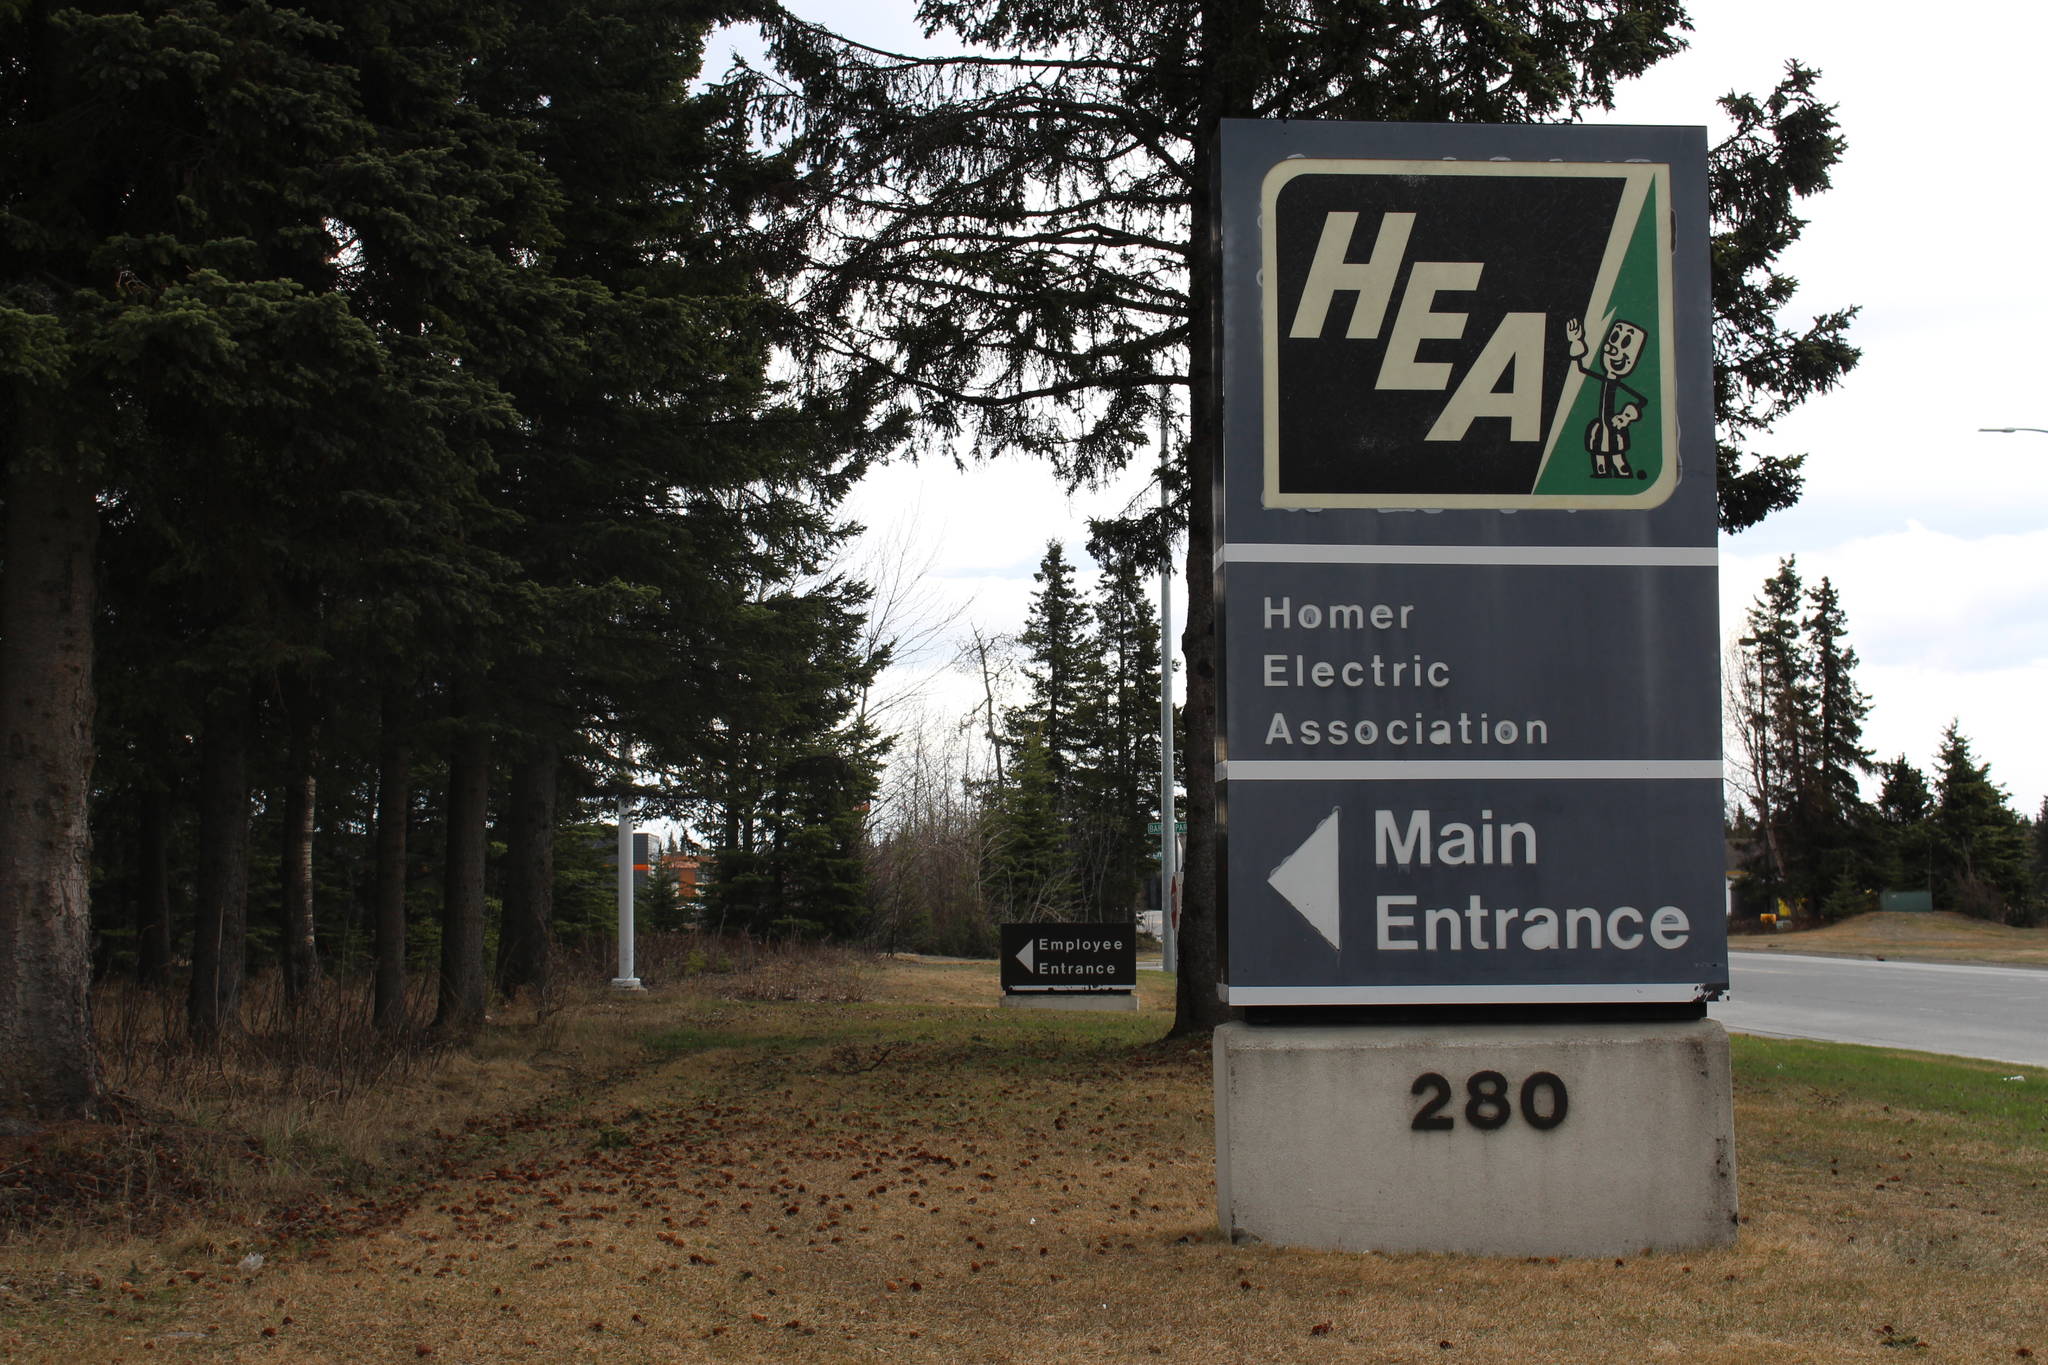 The entrance to the Homer Electric Association office is seen here in Kenai, Alaska on May 7, 2020. (Photo by Brian Mazurek/Peninsula Clarion)